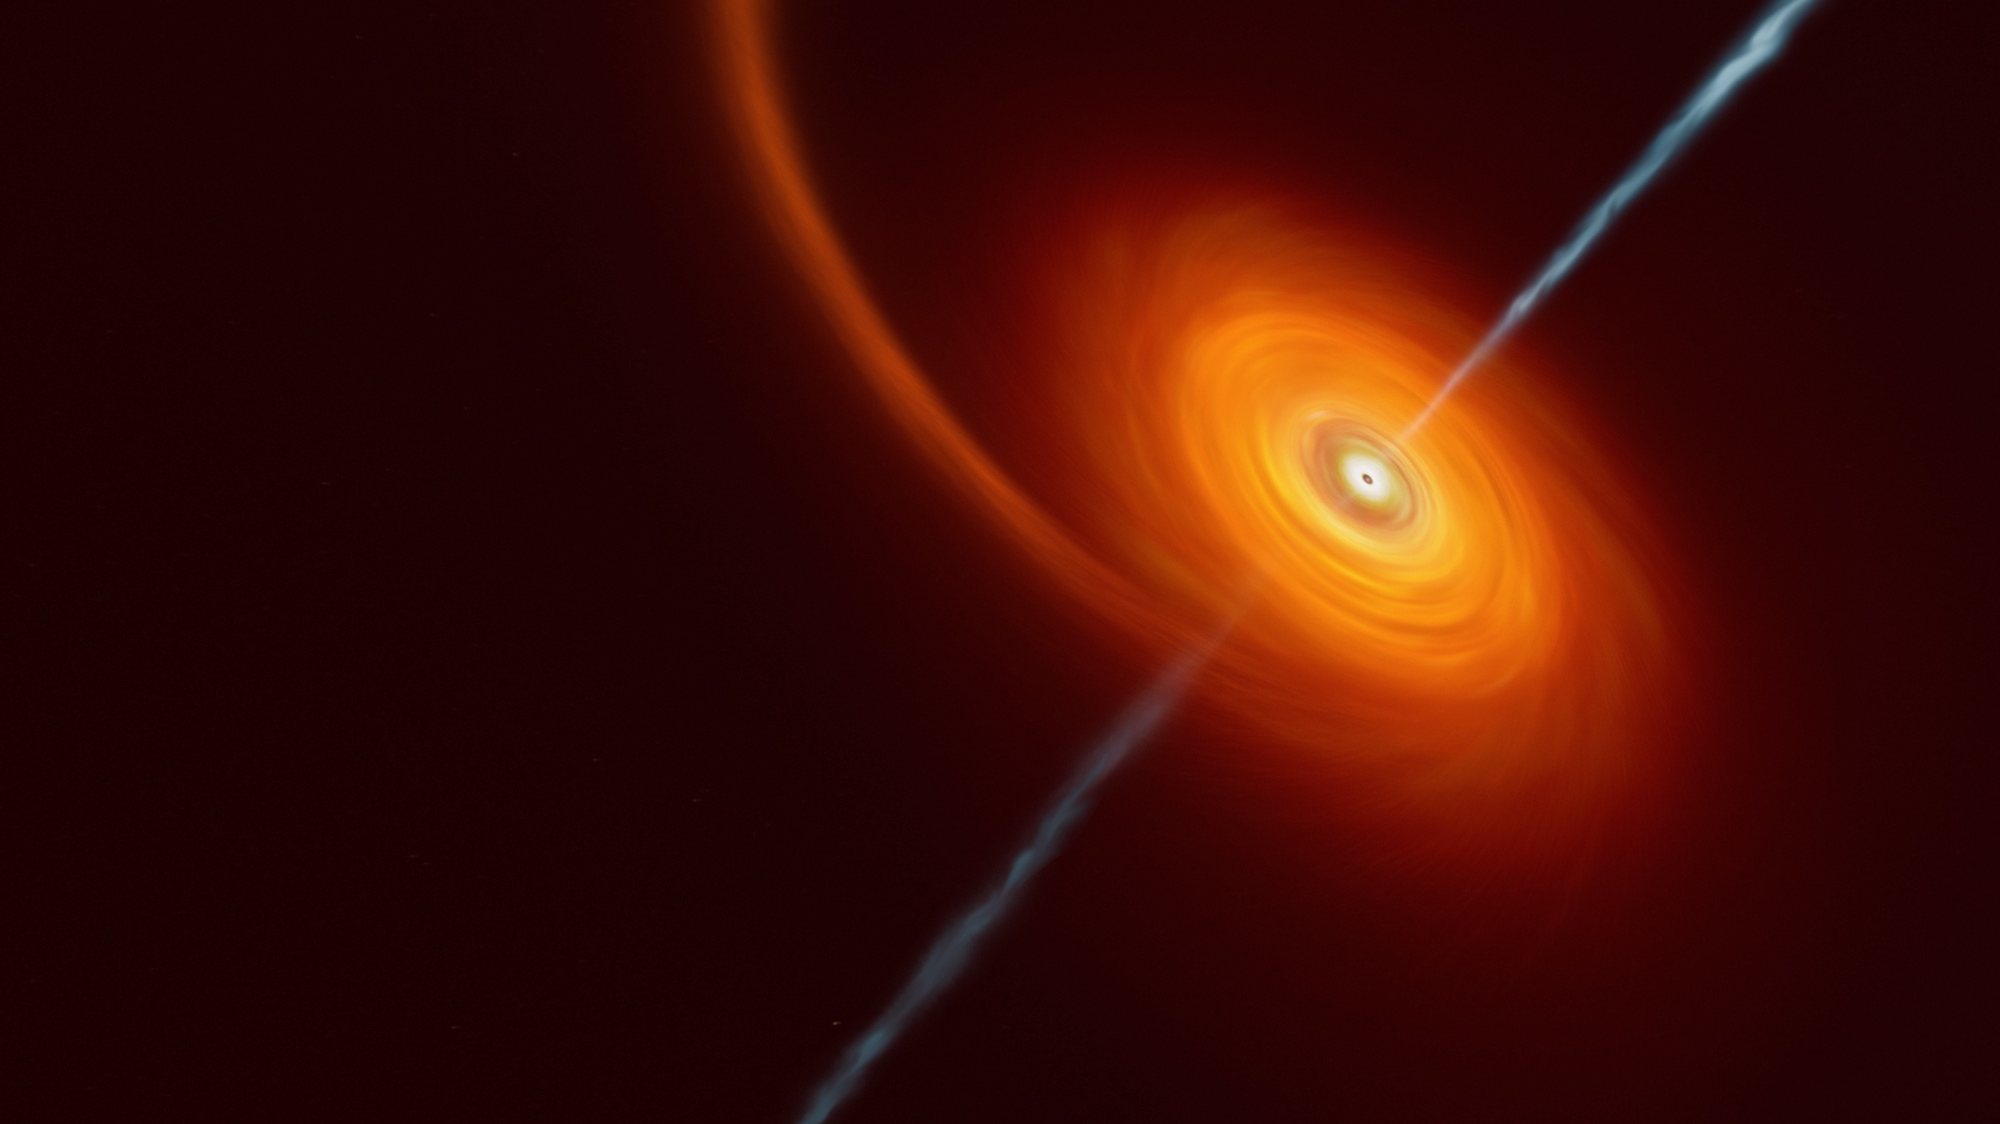 epa10339214 A handout photo made available by the European Southern Observatory (ESO) shows an artist&#039;s impression illustrating how it might look when a star approaches too close to a black hole, where the star is squeezed by the intense gravitational pull of the black hole (issued 30 November 2022). Some of the star&#039;s material gets pulled in and swirls around the black hole forming the disc that can be seen in this image. In rare cases, such as this one, jets of matter and radiation are shot out from the poles of the black hole. In the case of the AT2022cmc event, evidence of the jets was detected by various telescopes including the VLT, which determined this was the most distant example of such an event.  EPA/ESO/M.Kornmesser / HANDOUT  HANDOUT EDITORIAL USE ONLY/NO SALES